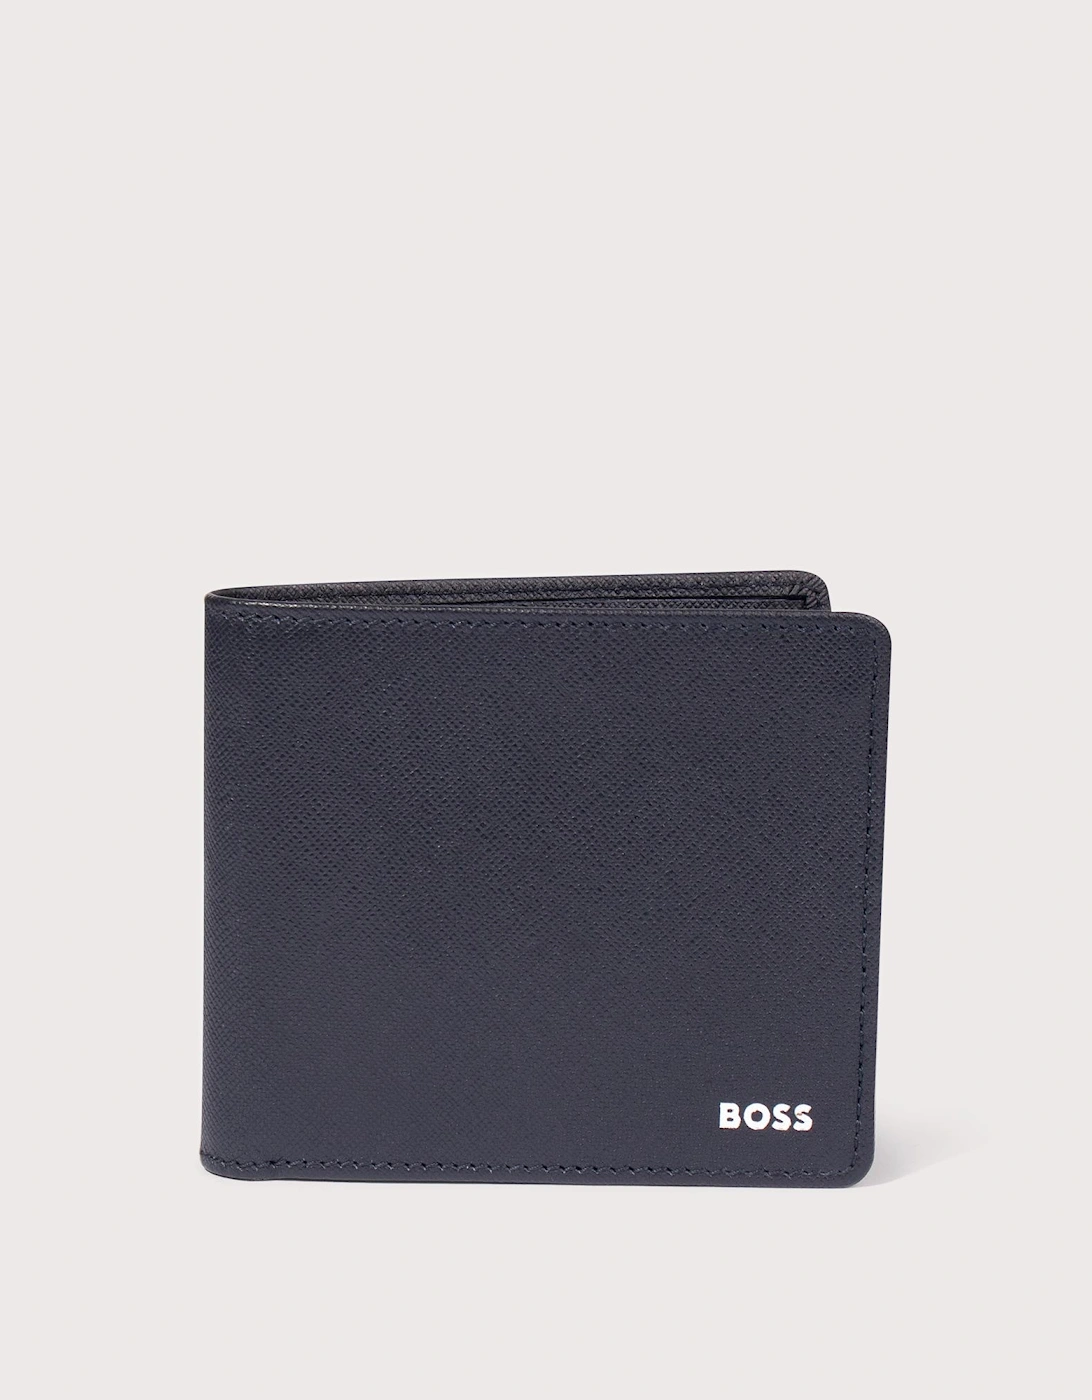 GBBM_8 CC Leather Card Holder And Wallet Gift Set